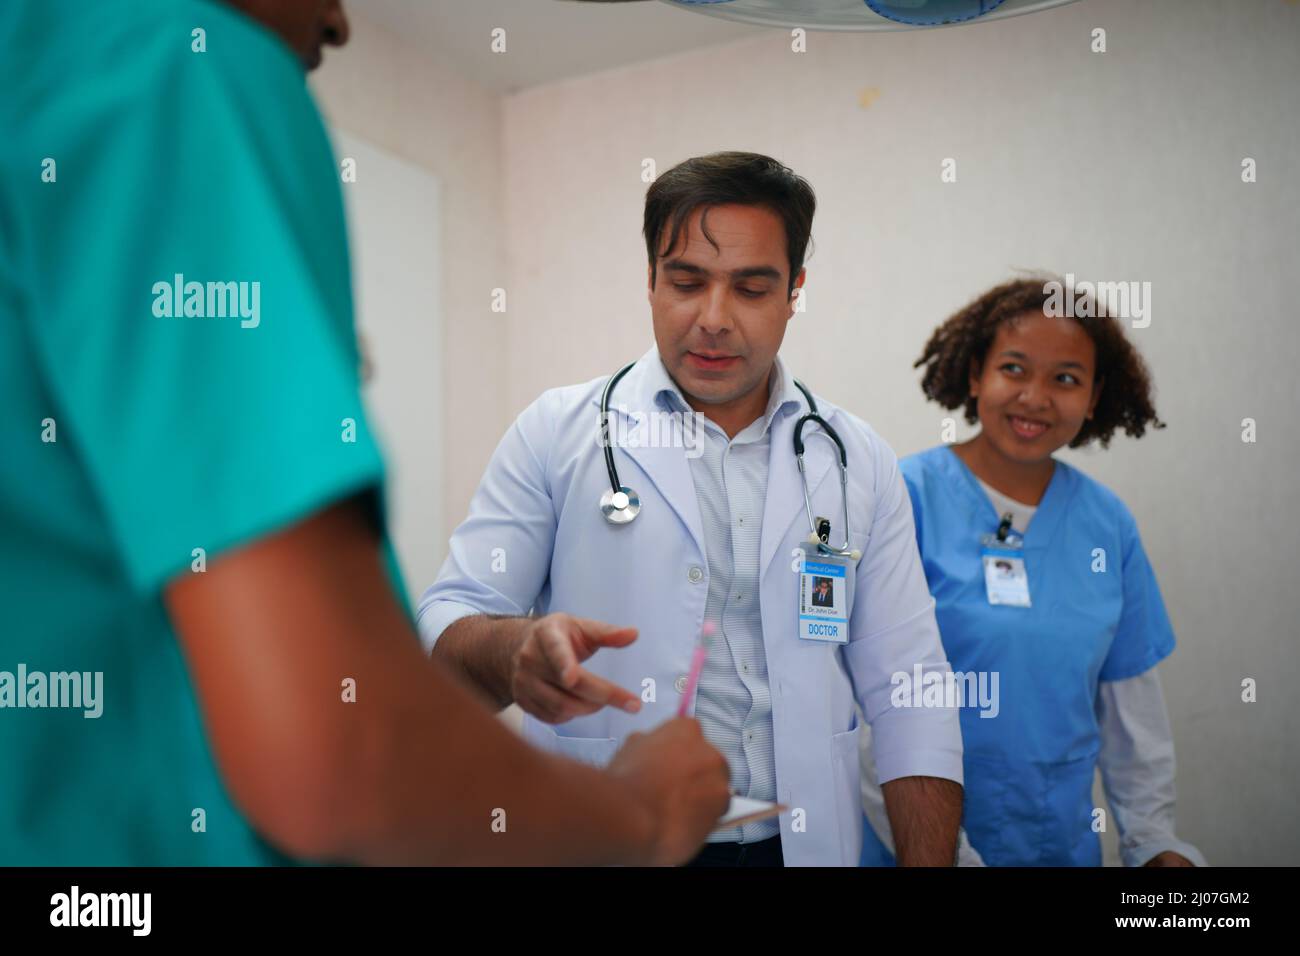 Nurse and doctor team ready for work day Stock Photo